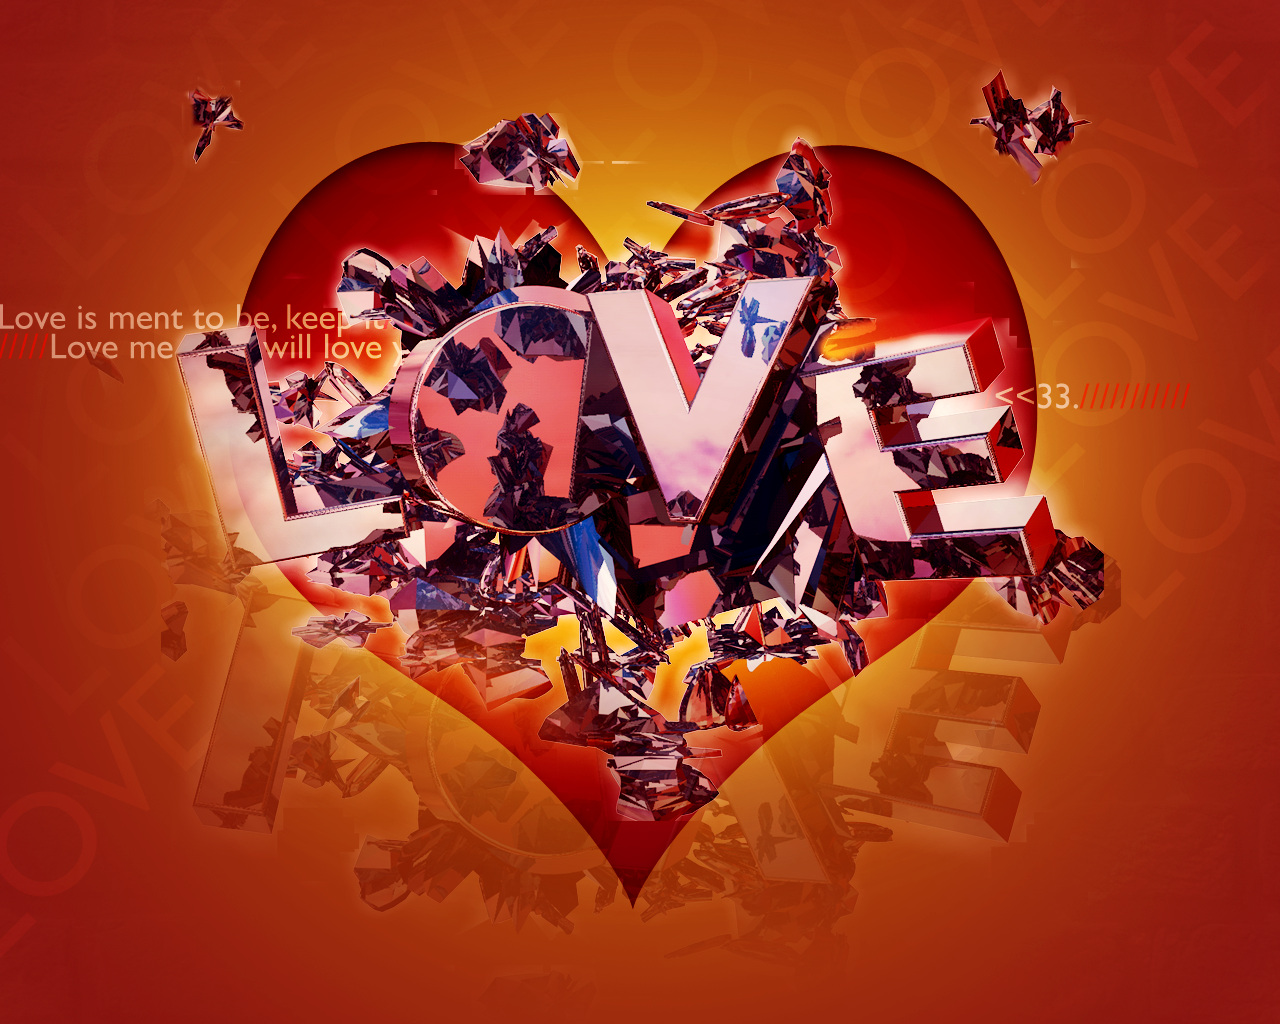 new wallpaper of love,heart,red,text,font,love